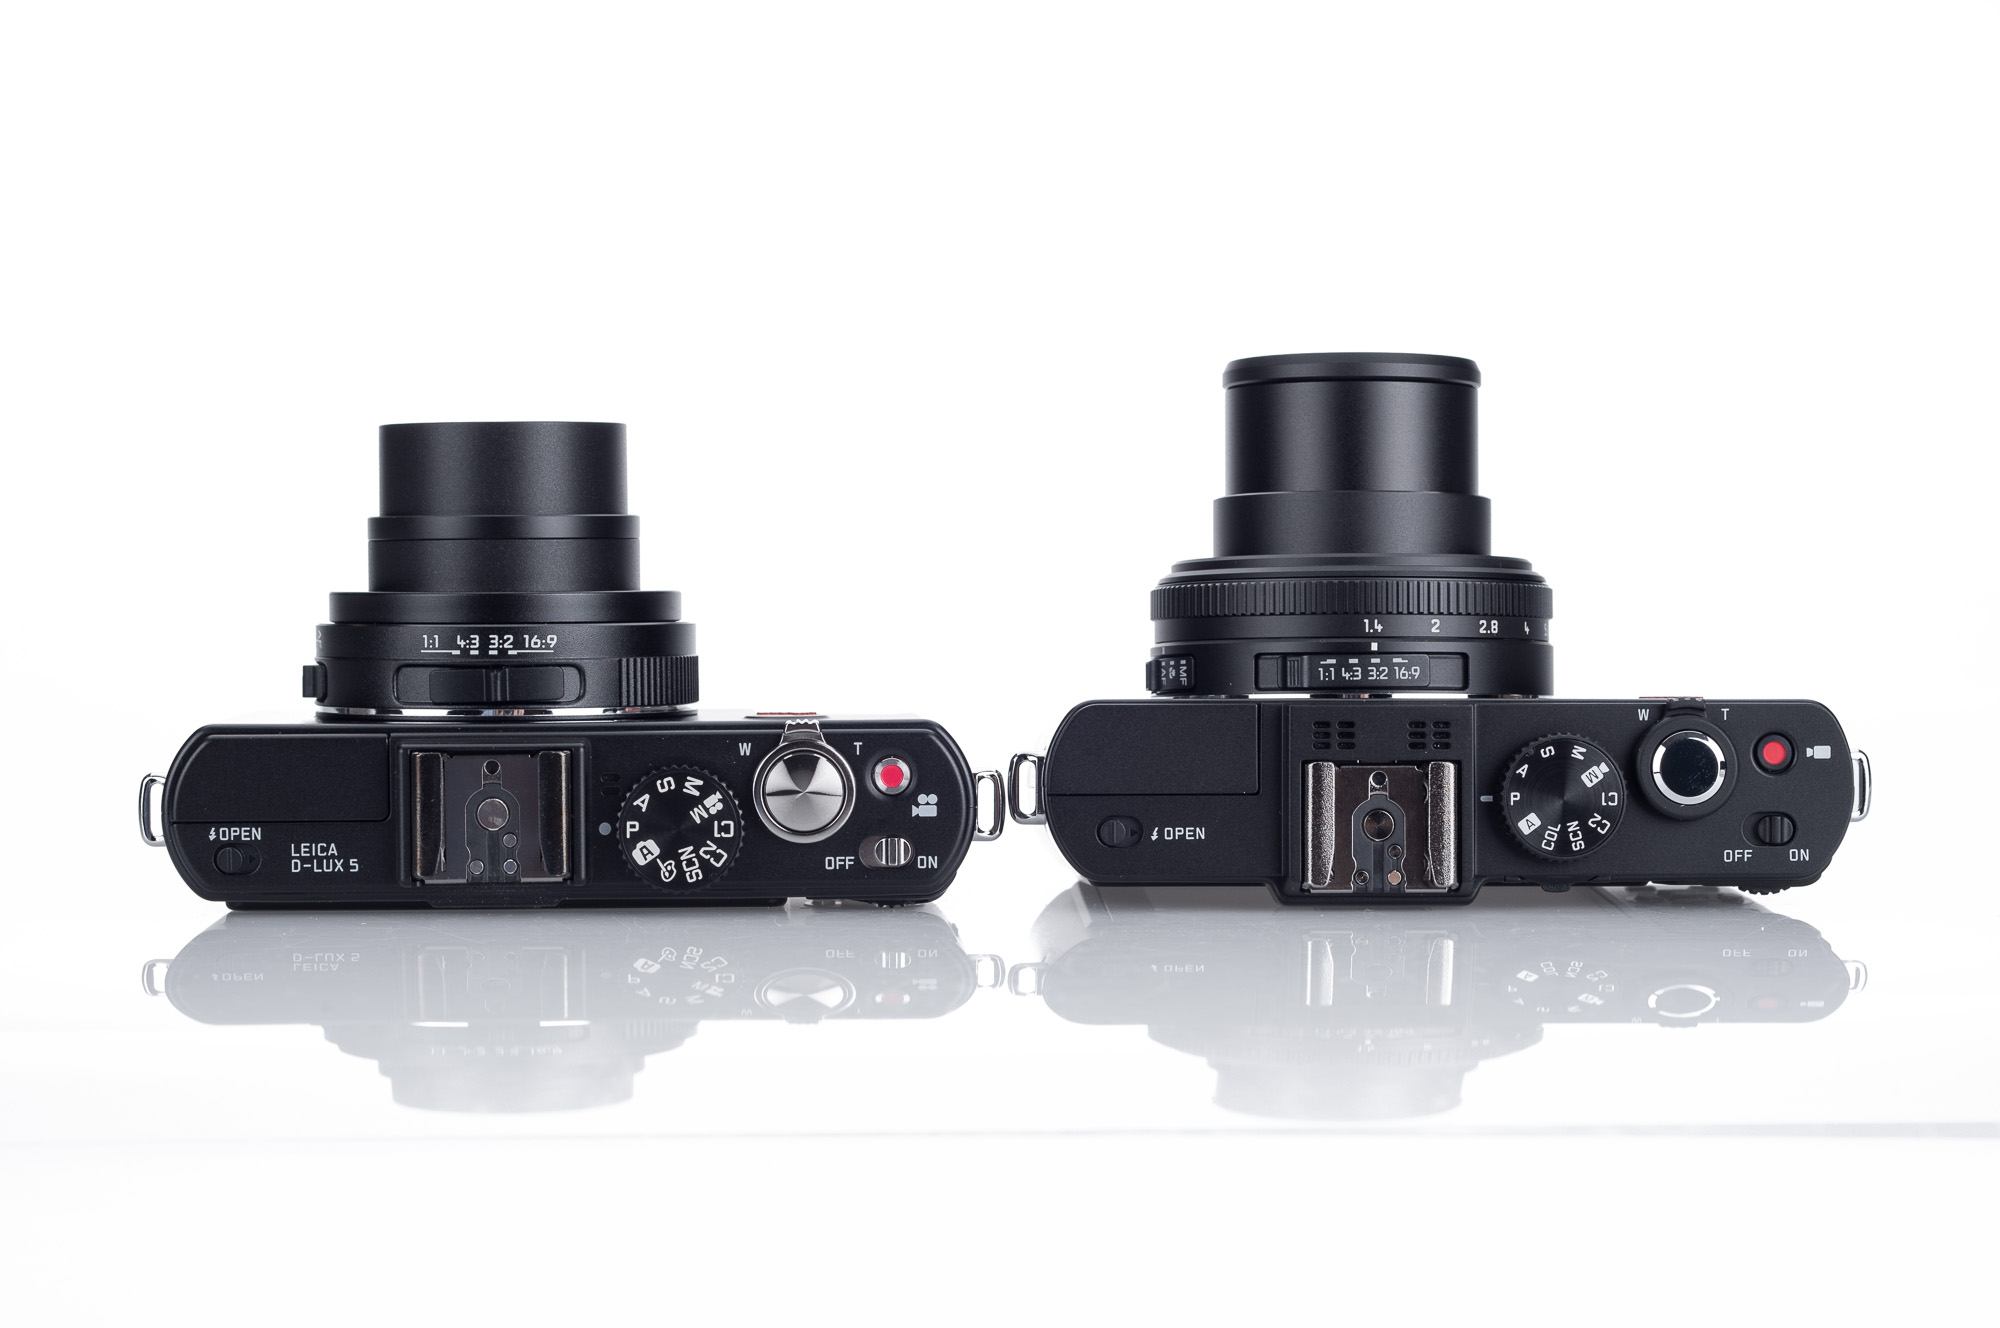 Leica D-LUX 6 announced: It's all about the aperture